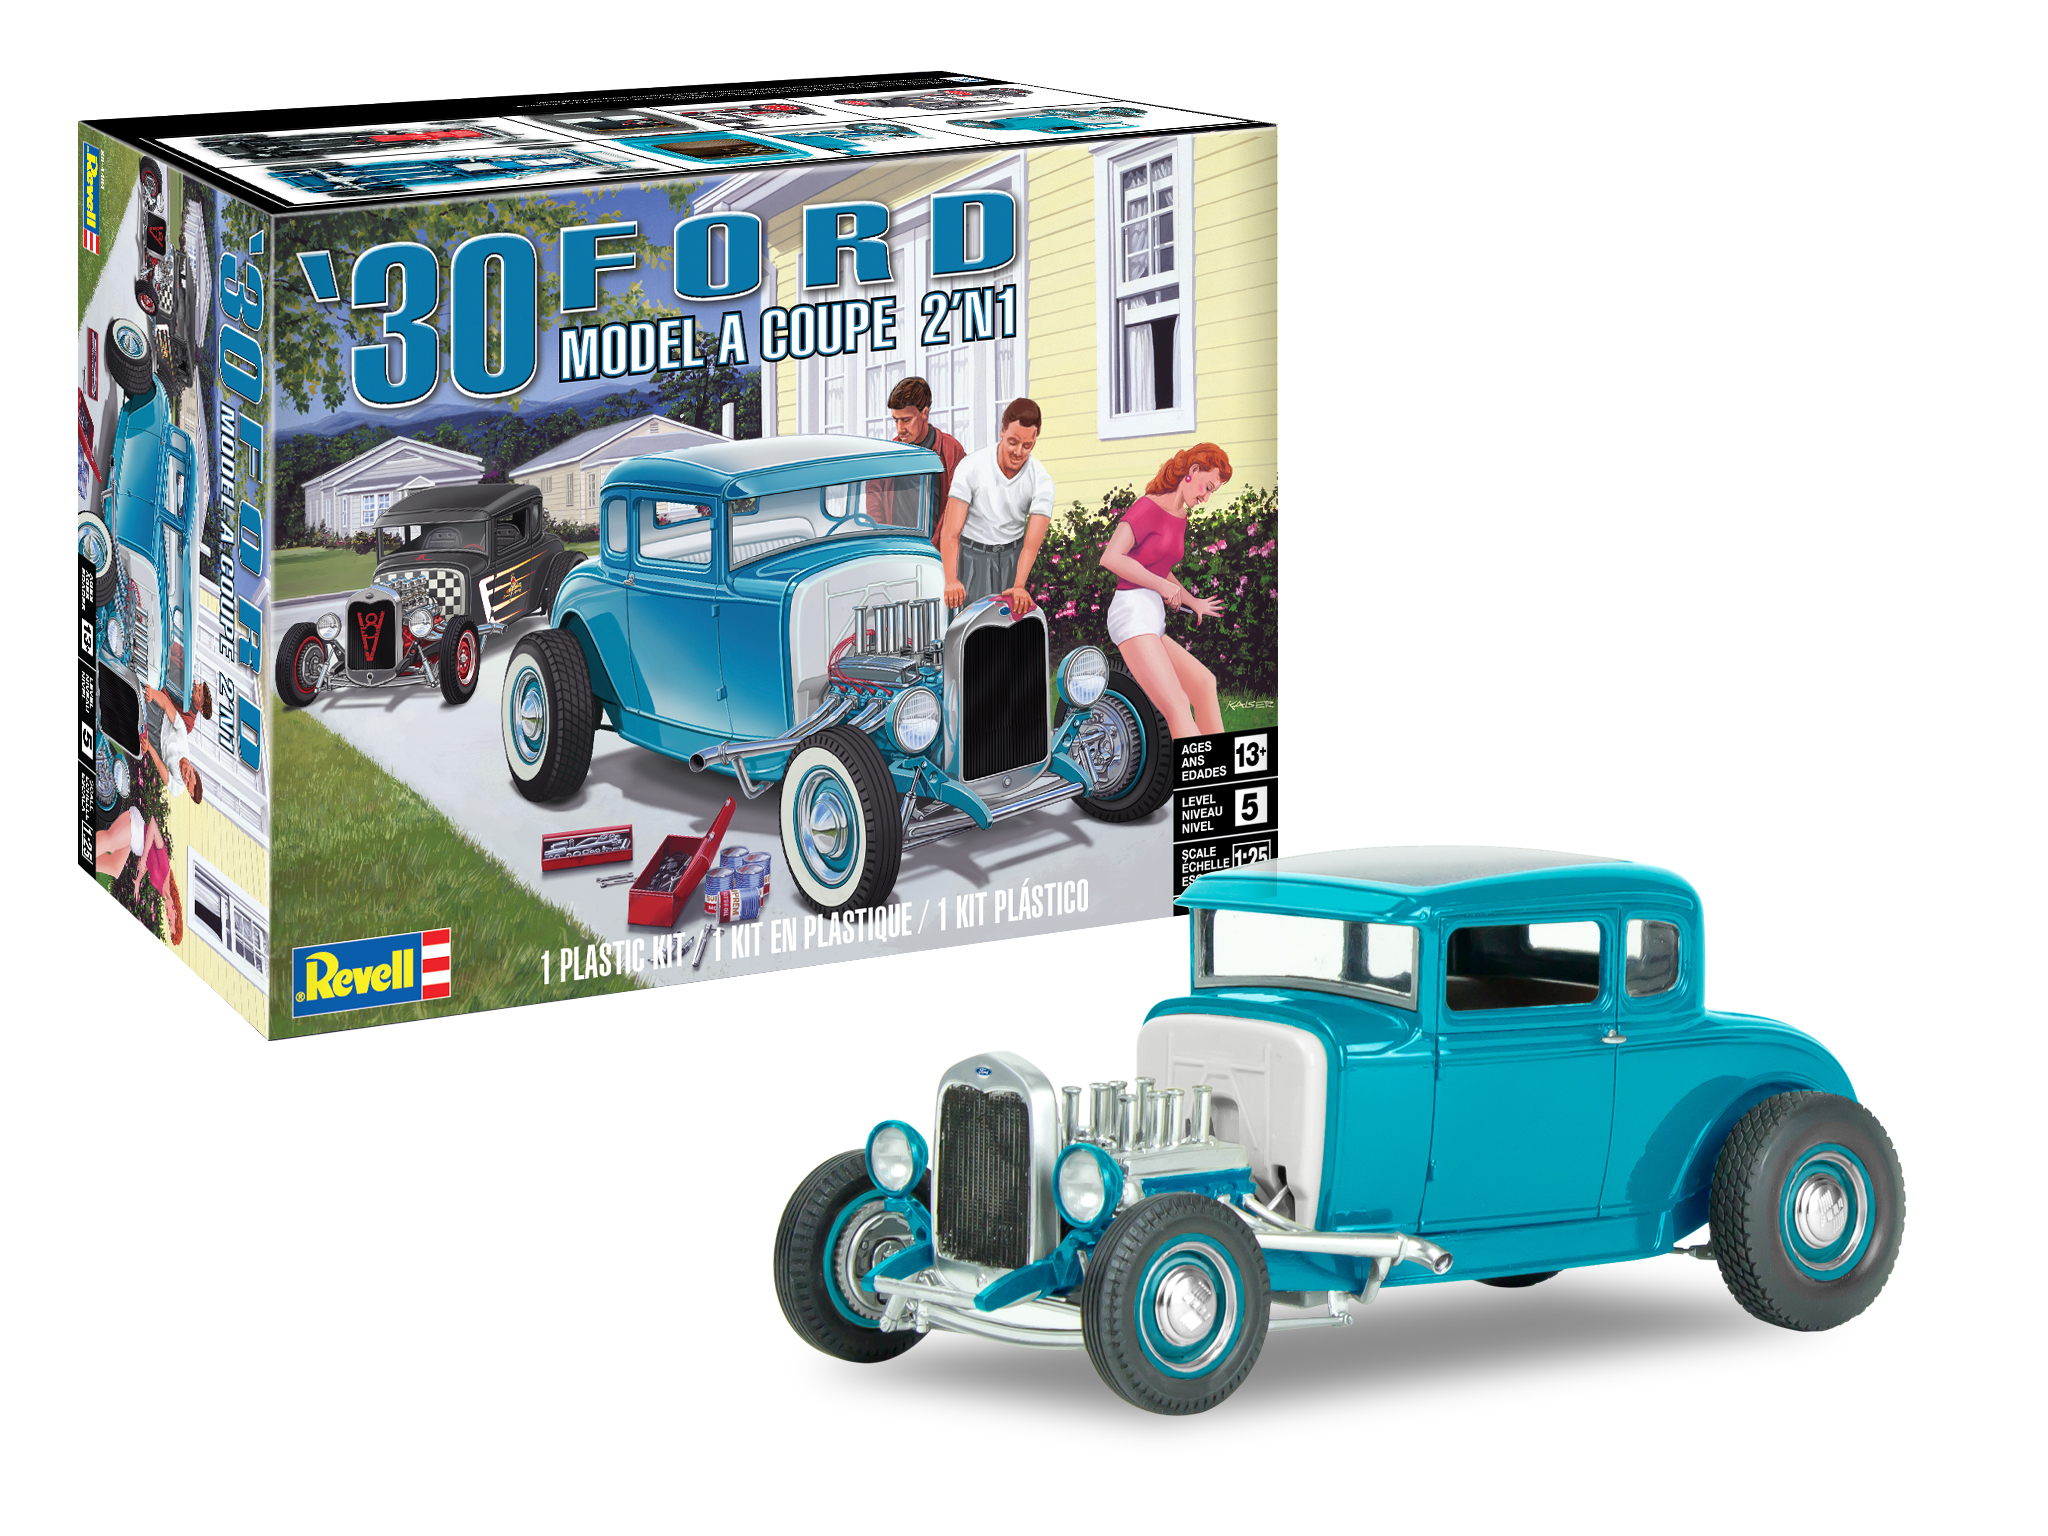 revell-85-4464-1-1930-Ford-Model-A-Coupé-Hot-Rod-2n1